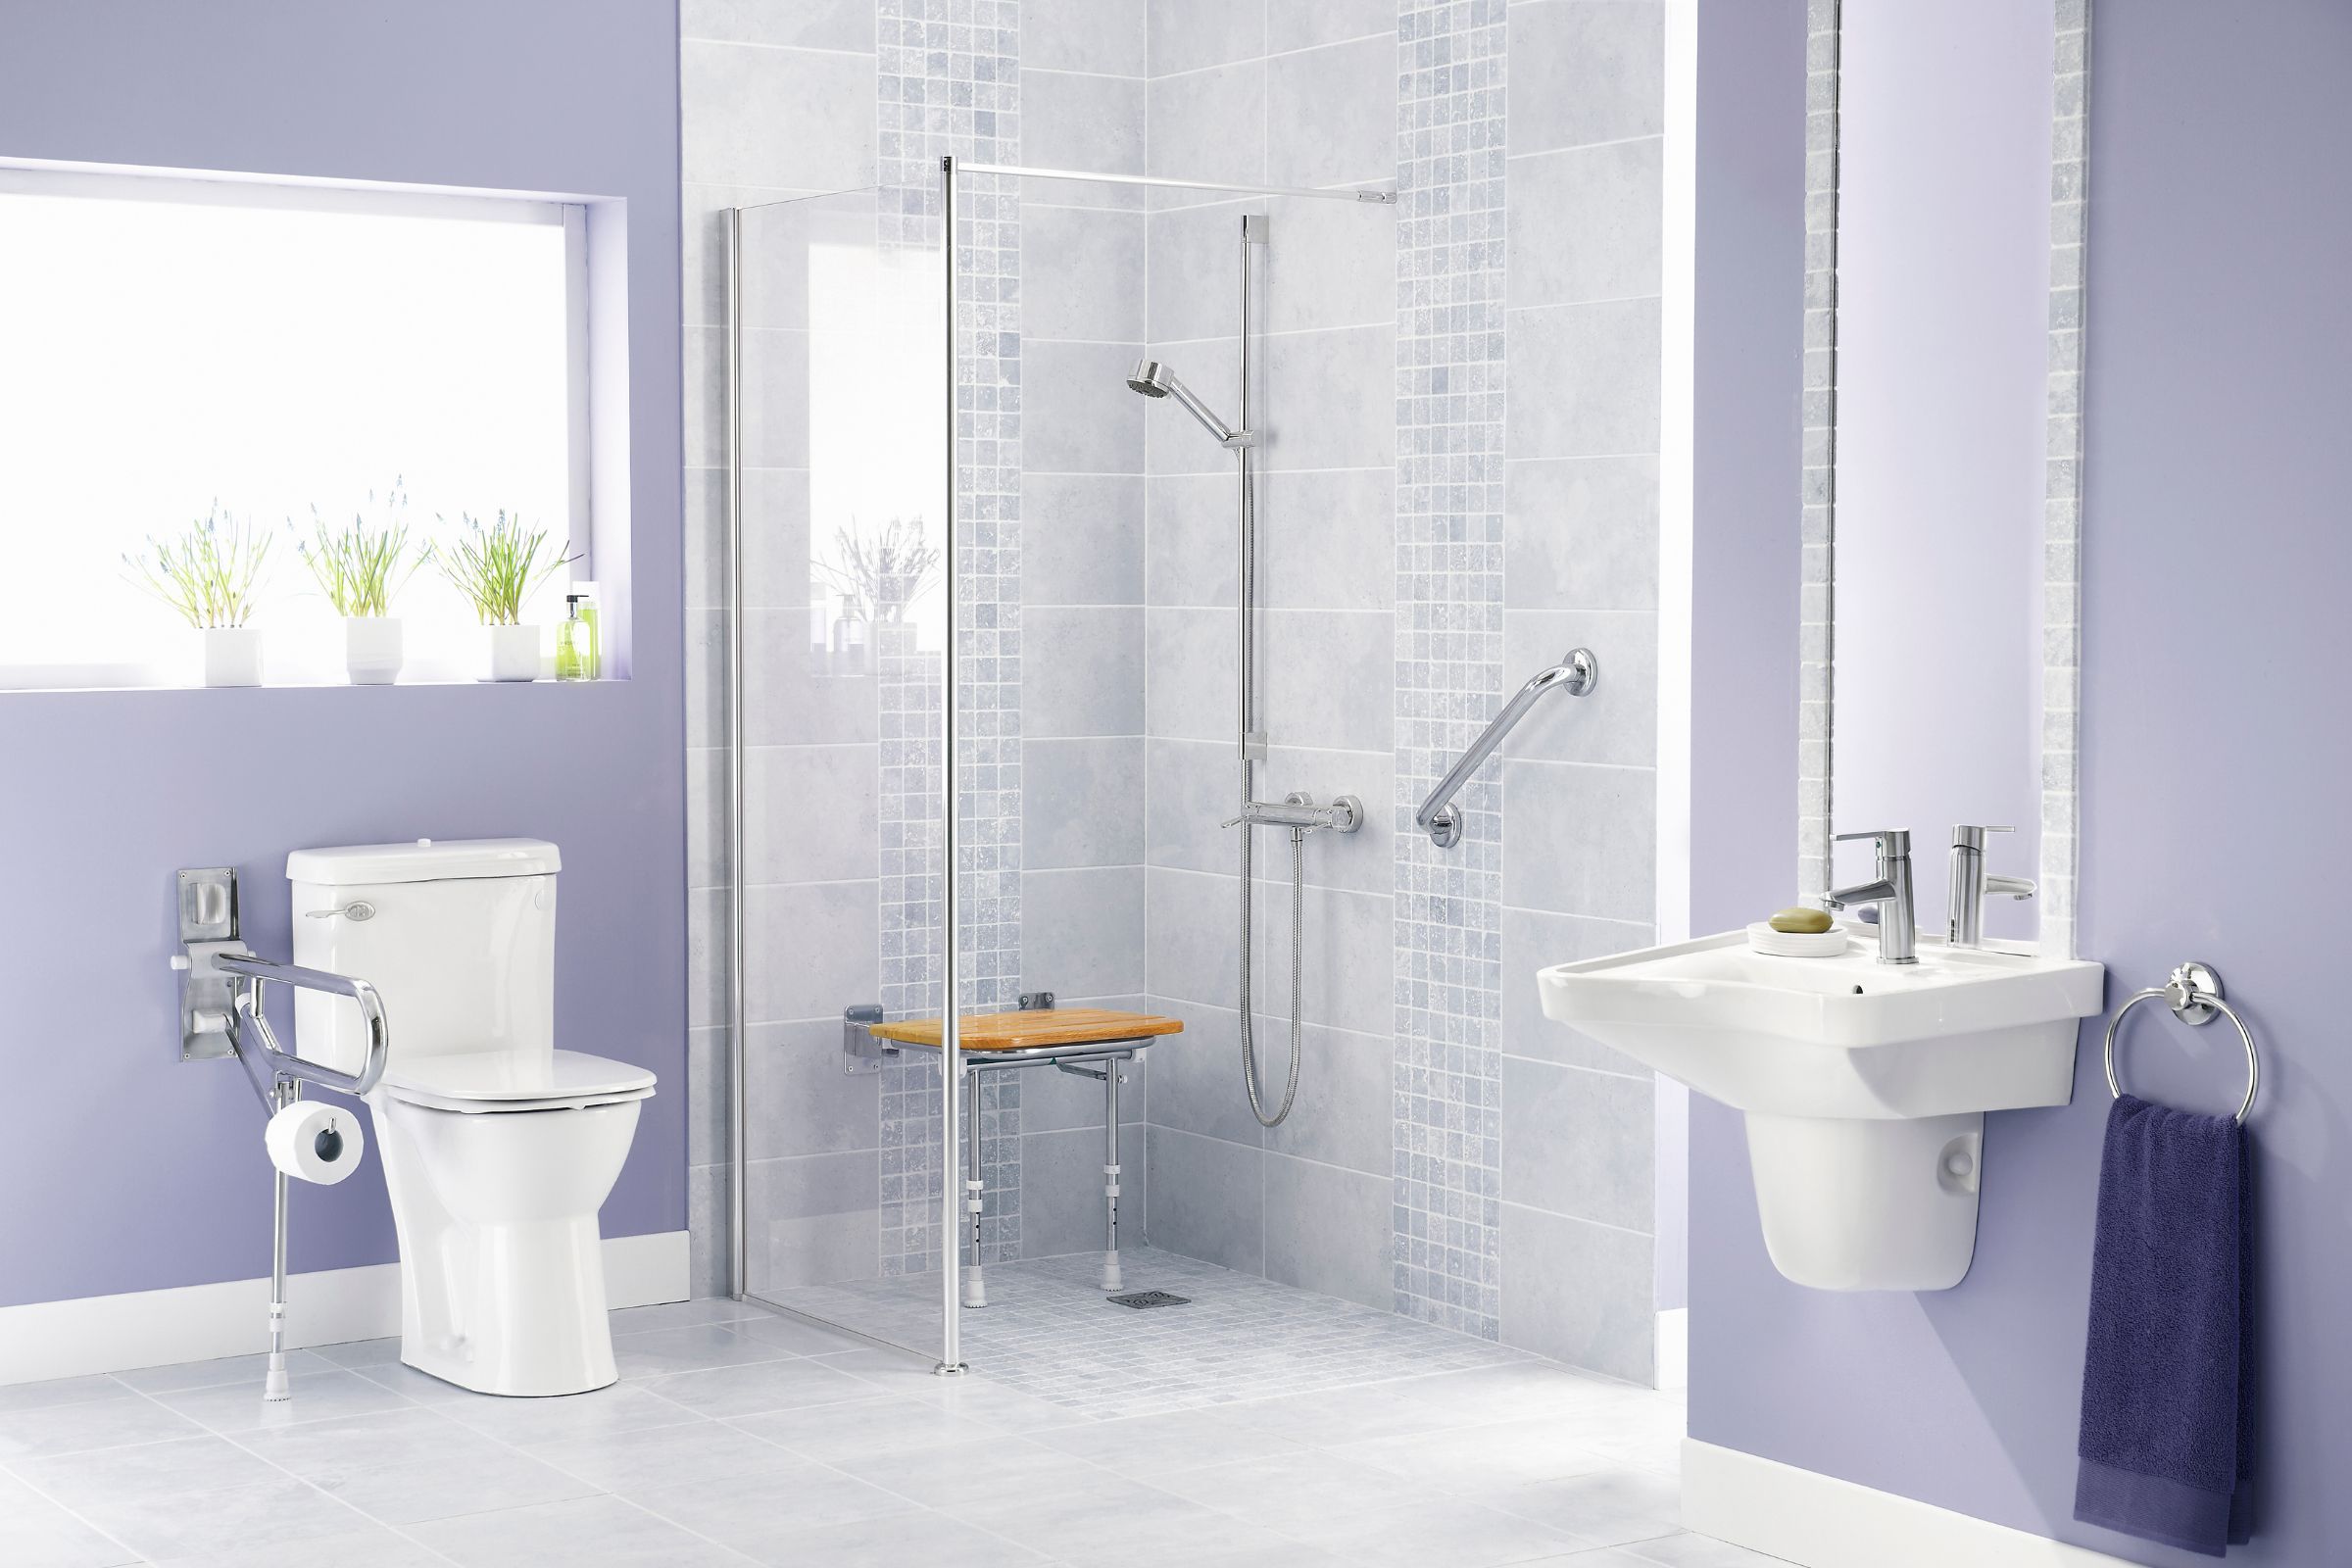 Accessible Bathrooms: Benefits, Design Considerations & Costs